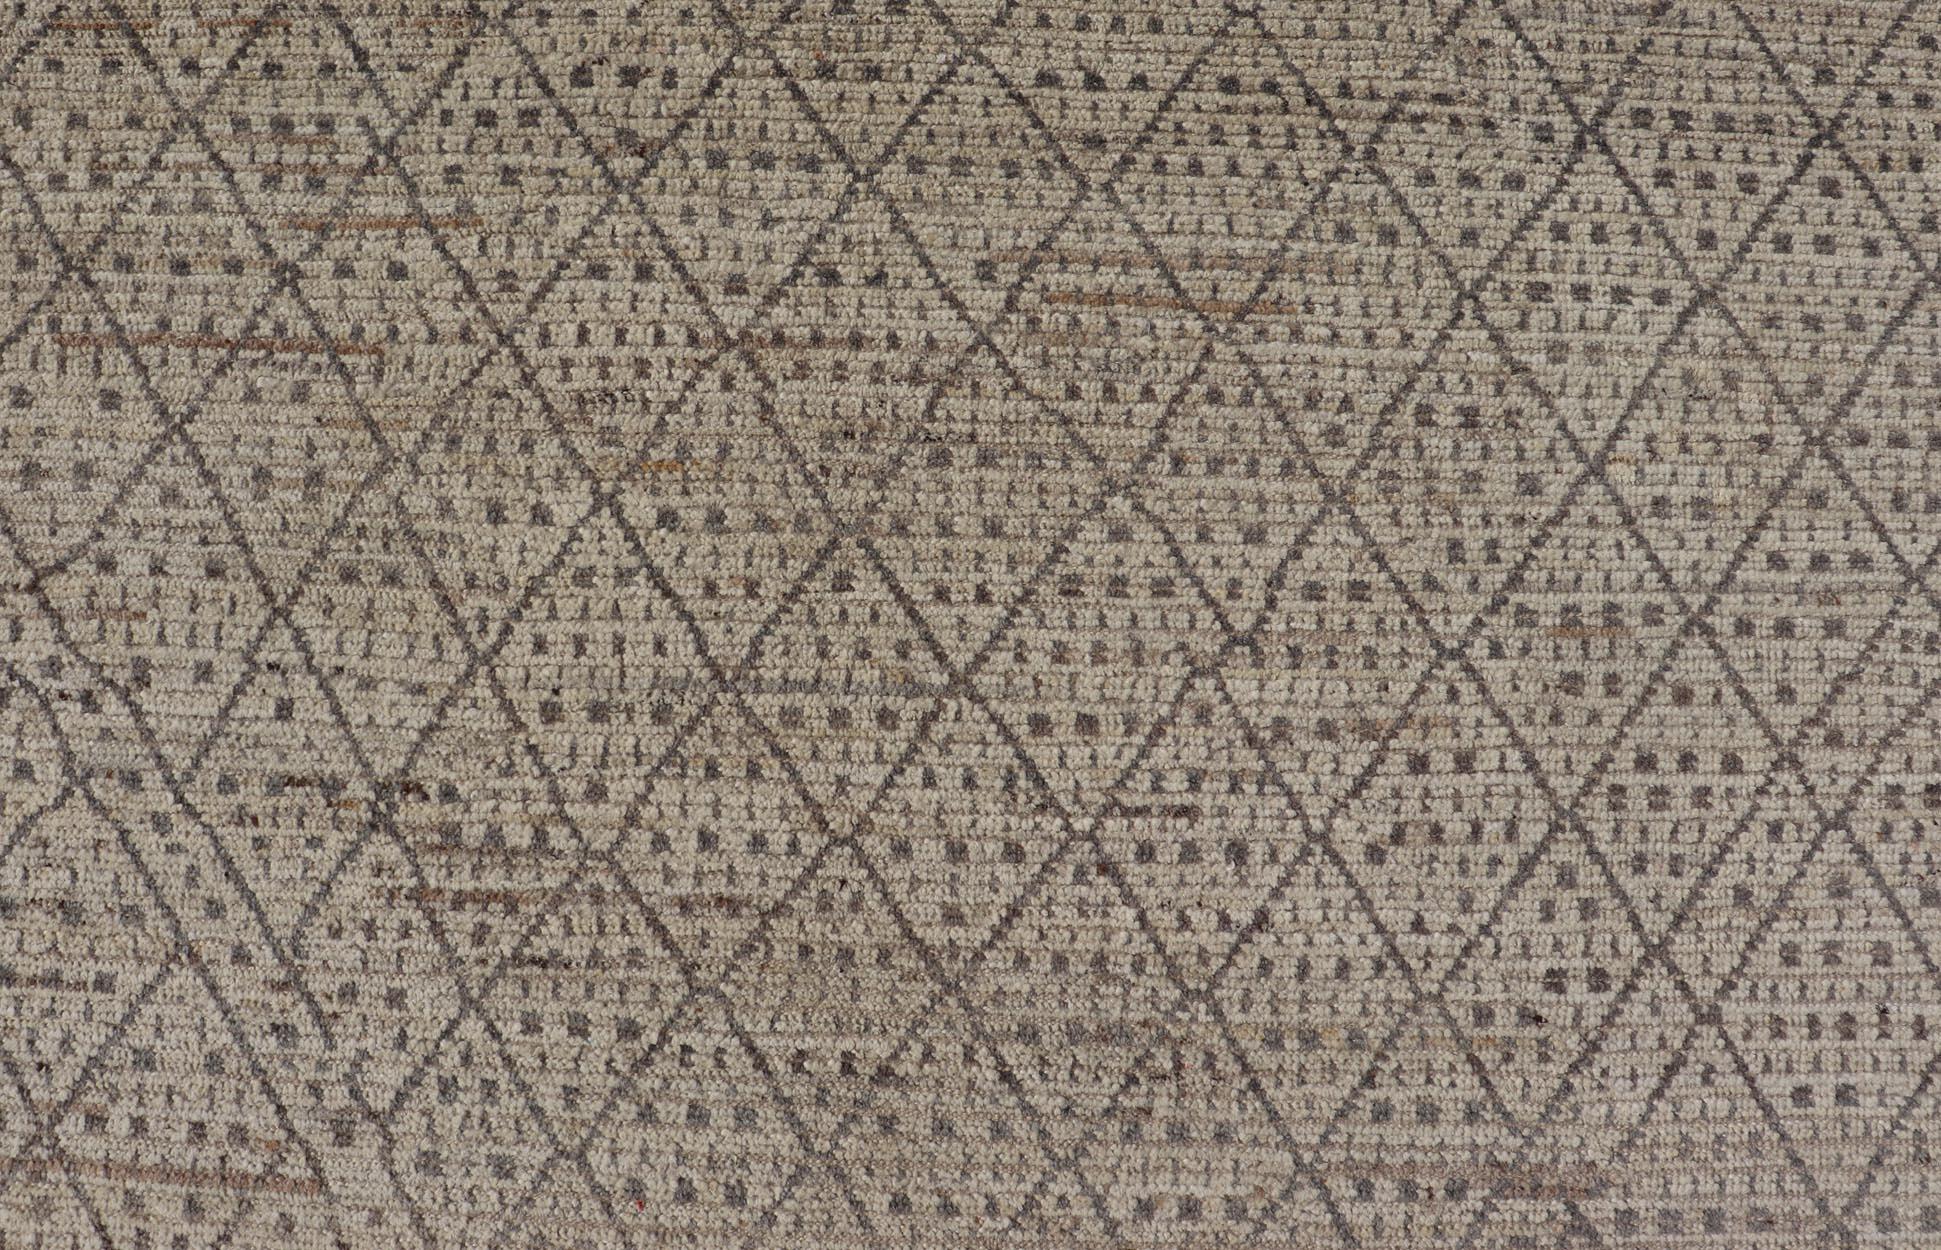 This modern casual tribal rug has been hand-knotted in wool. The rug features a modern sub-geometric diamond design, replete with various motifs within each diamond. The rug is rendered in earthy tones; making this rug a superb fit for a variety of